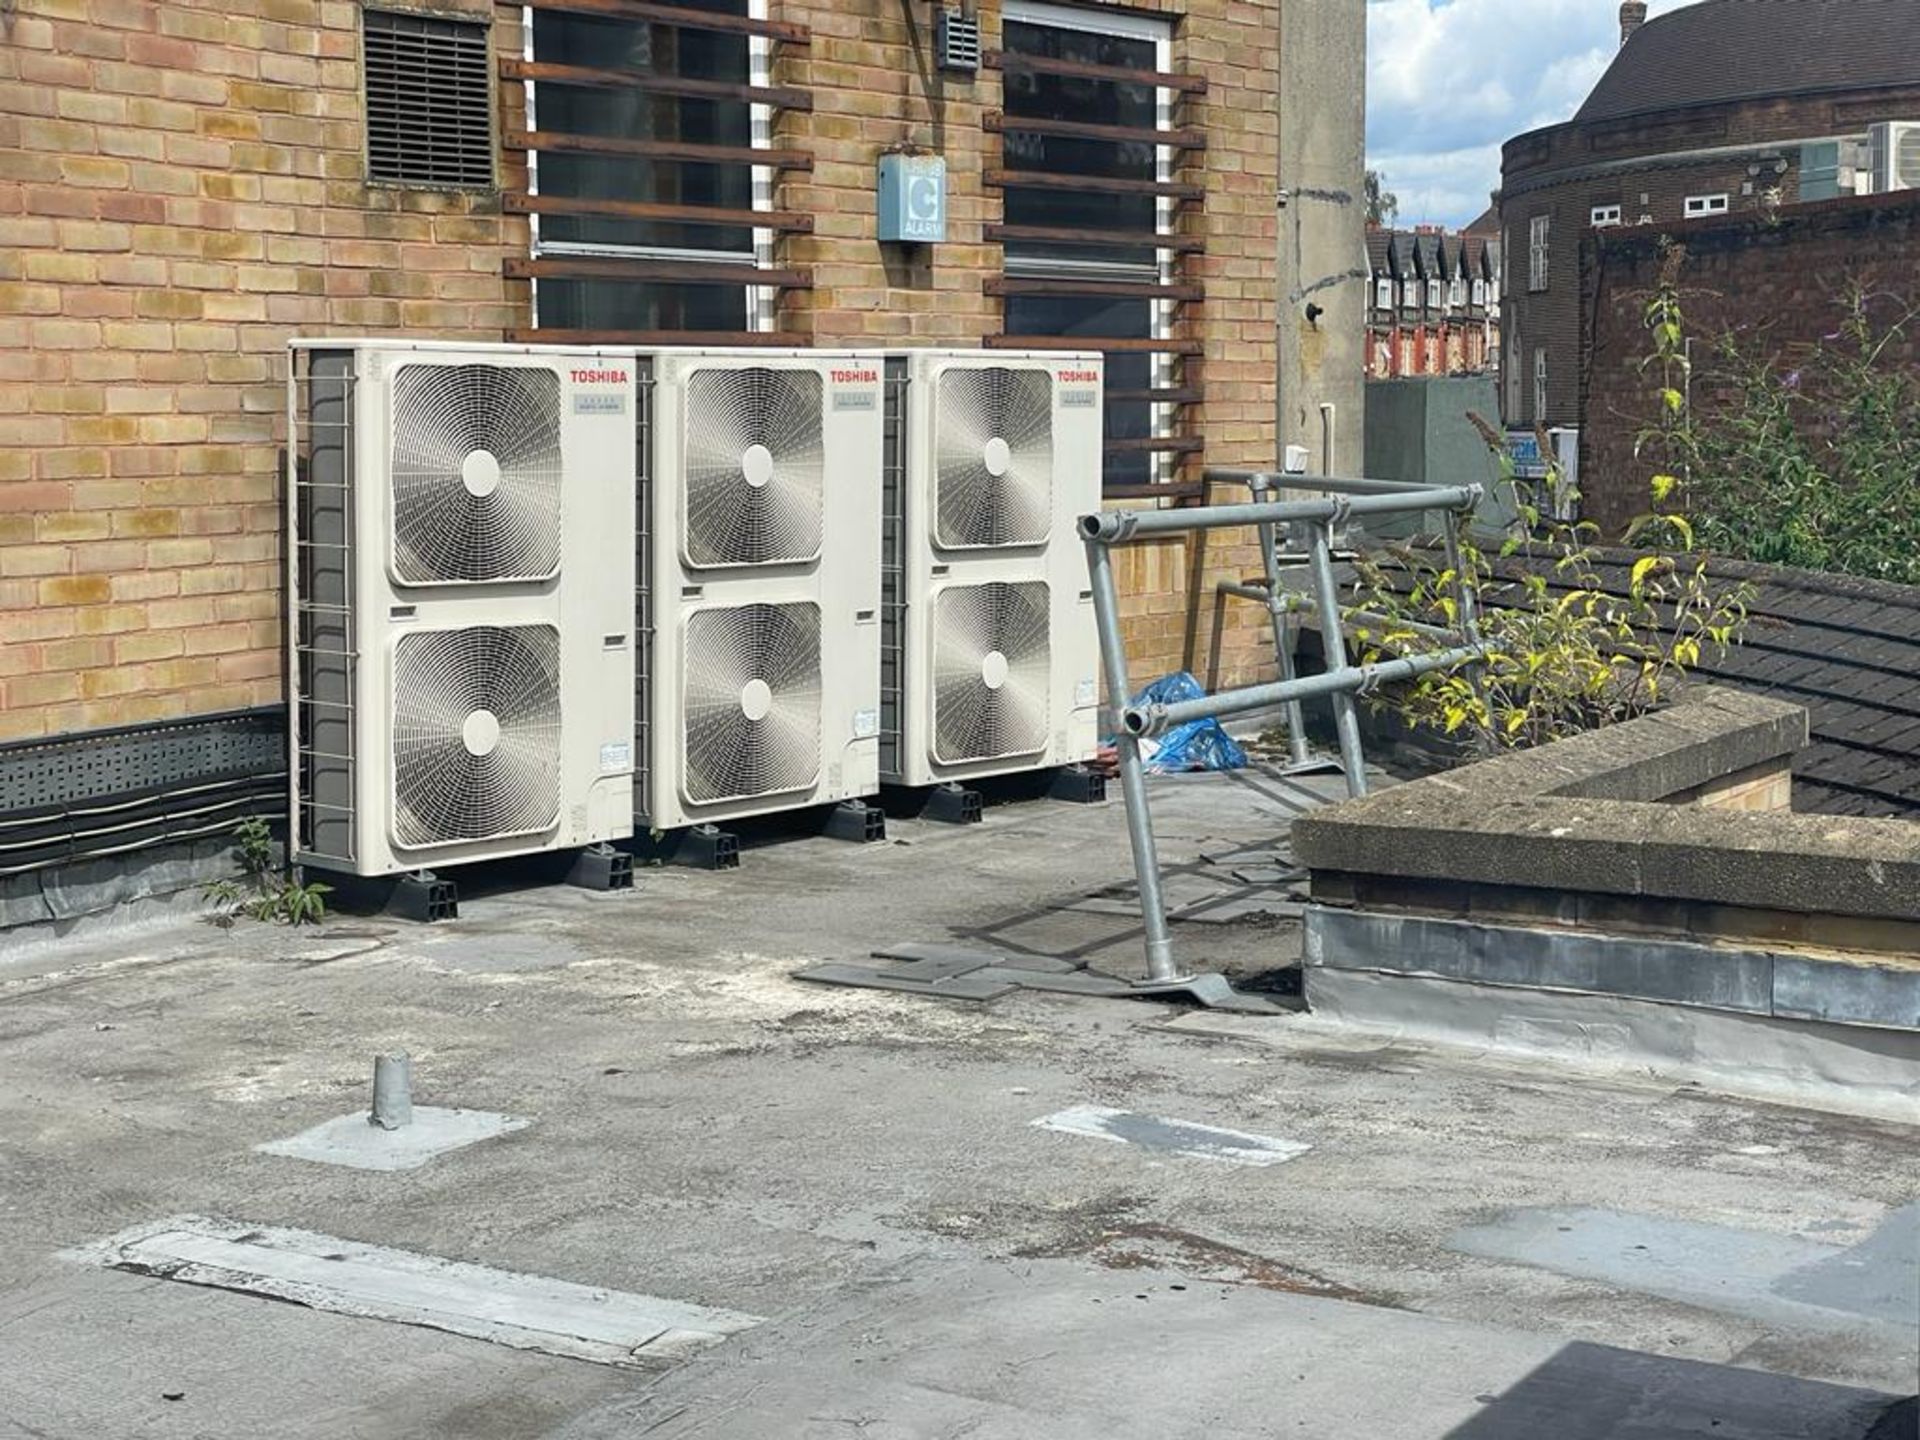 1 x Toshiba Air Conditioning System - Includes 3 x Indoor Cassettes and 3 x Outdoor Condensers - Image 4 of 5